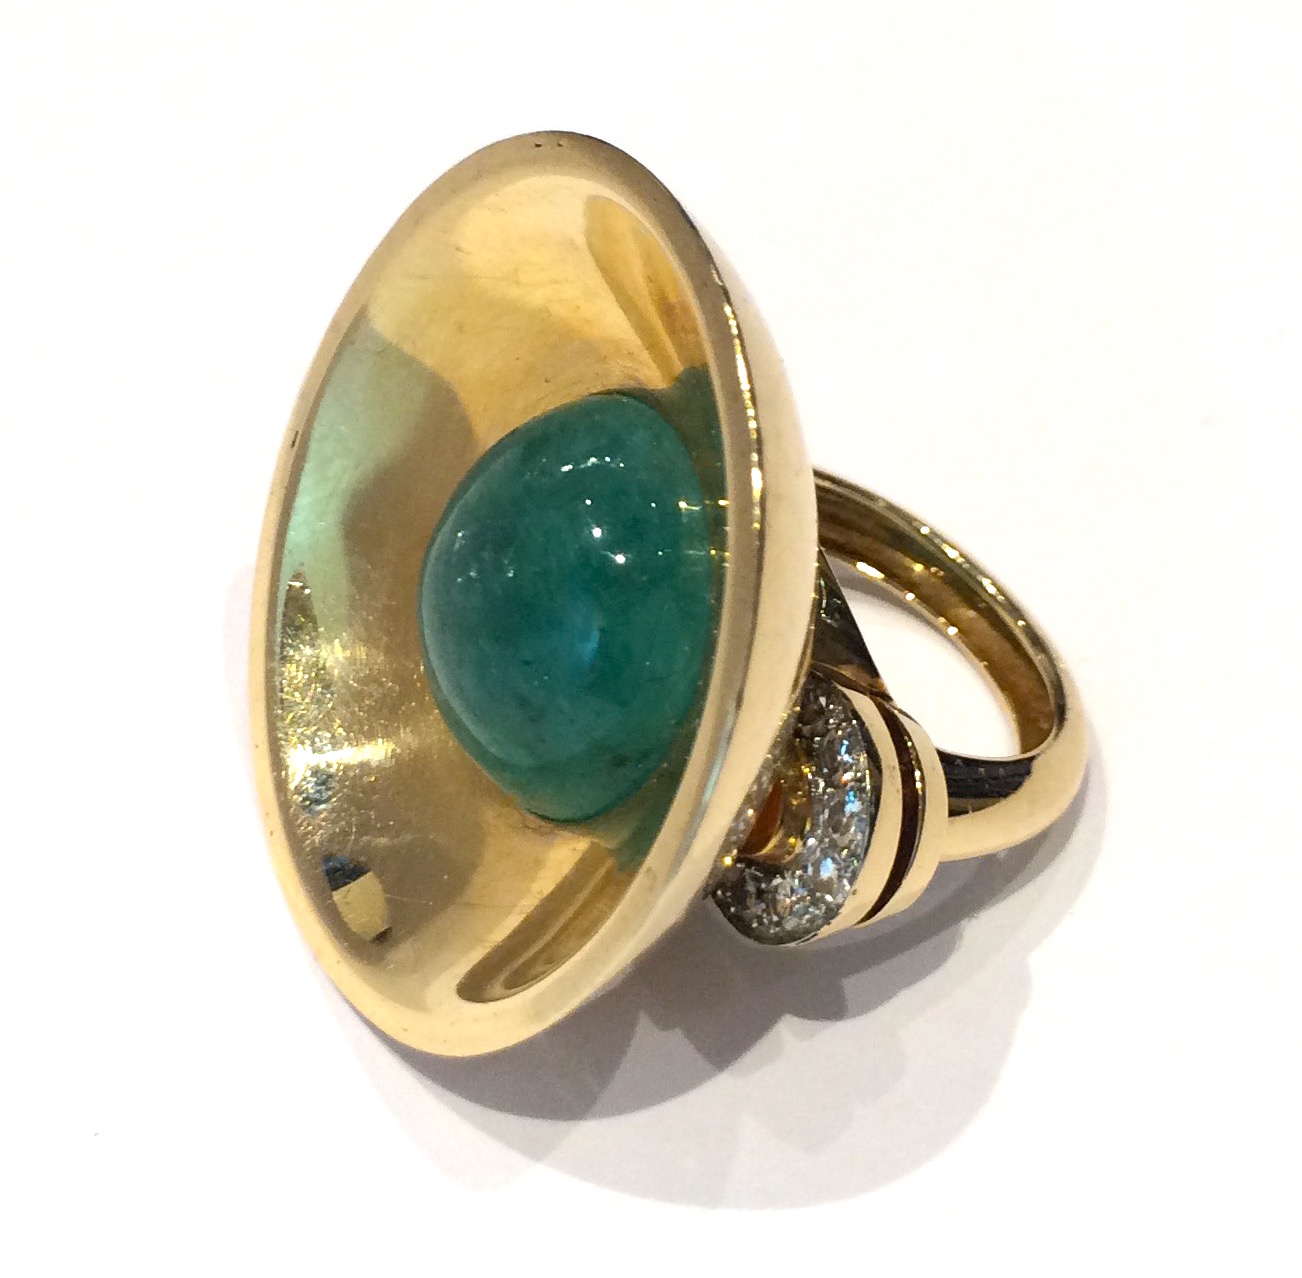 American Art Deco, cabochon emerald (approx. 14 carats TW) 18K rose gold ring with a large concave half dome surround and ring shank with two flanges on either side further set with 14 diamonds (approx. 1.50 carats TW), c. 1935